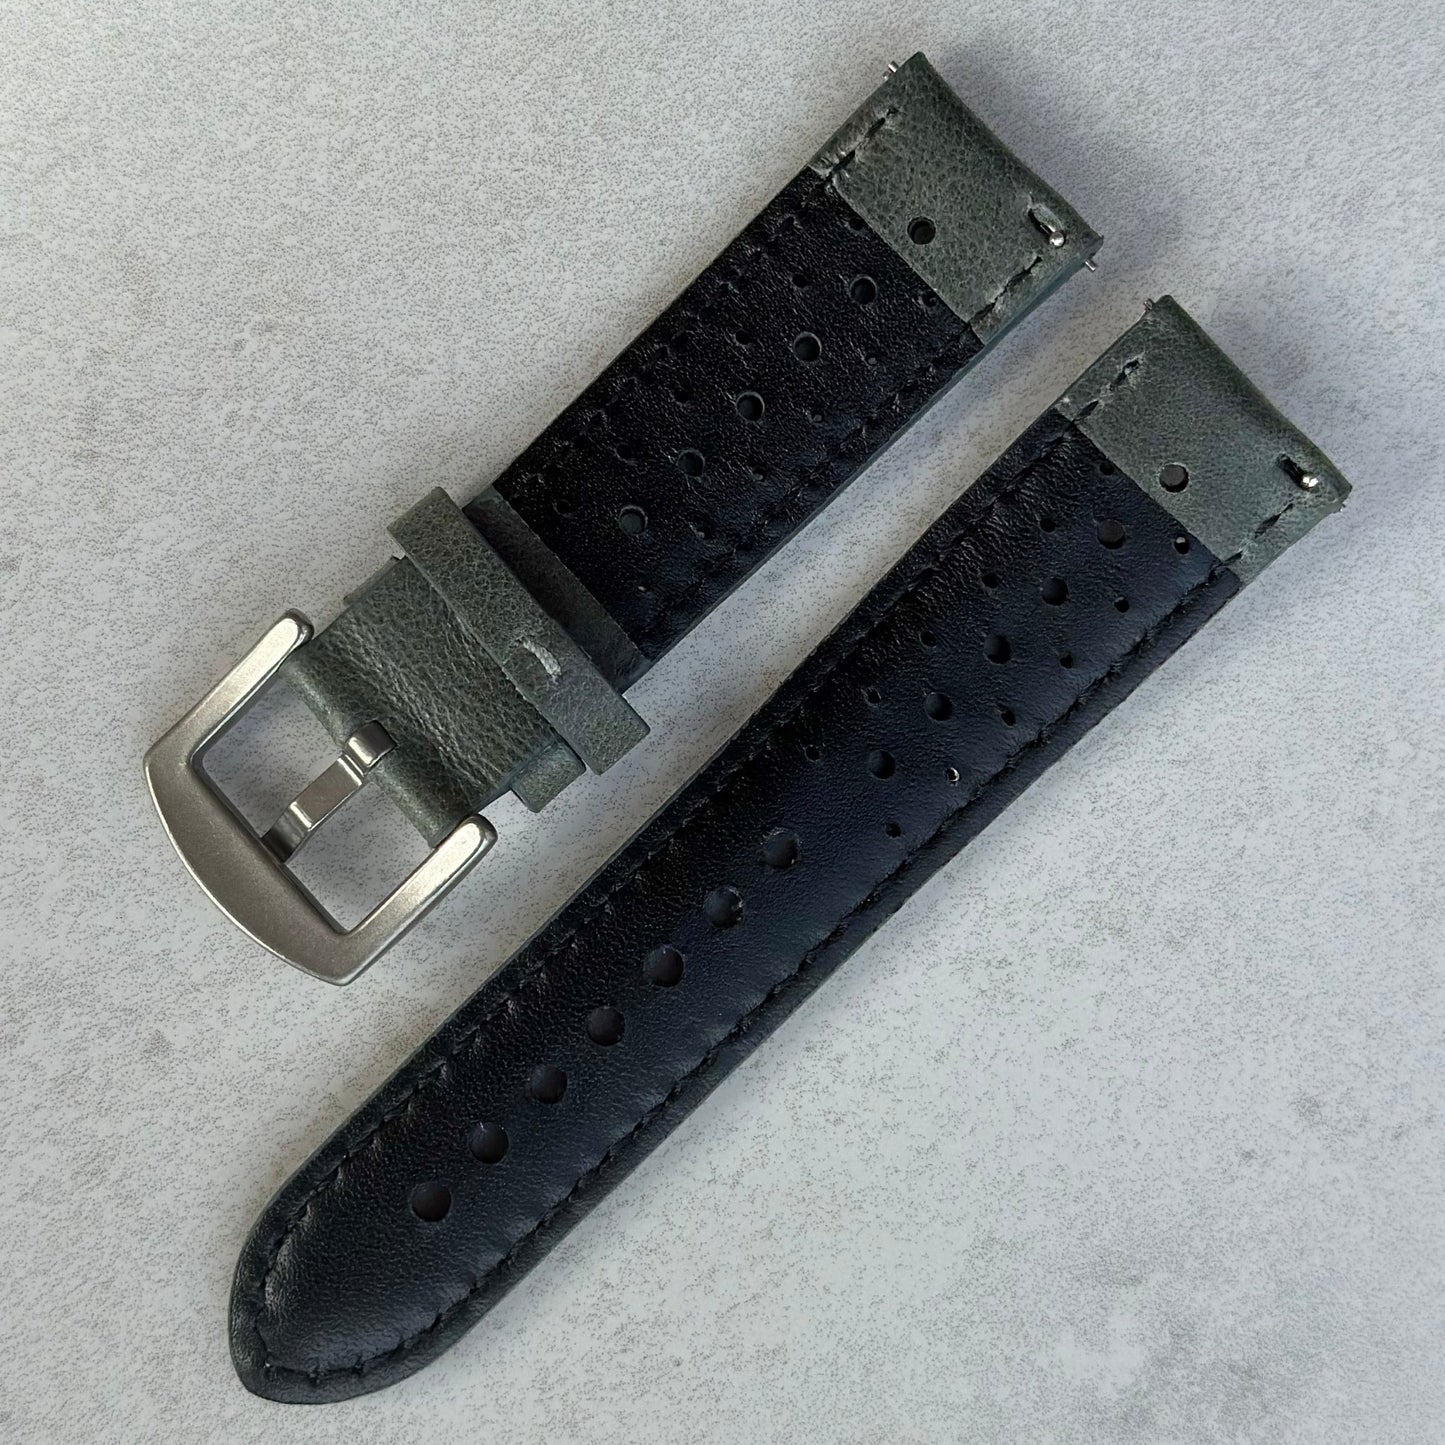 Underside of the Montecarlo grey full grain leather watch strap. Quick release pins. Watch And Strap